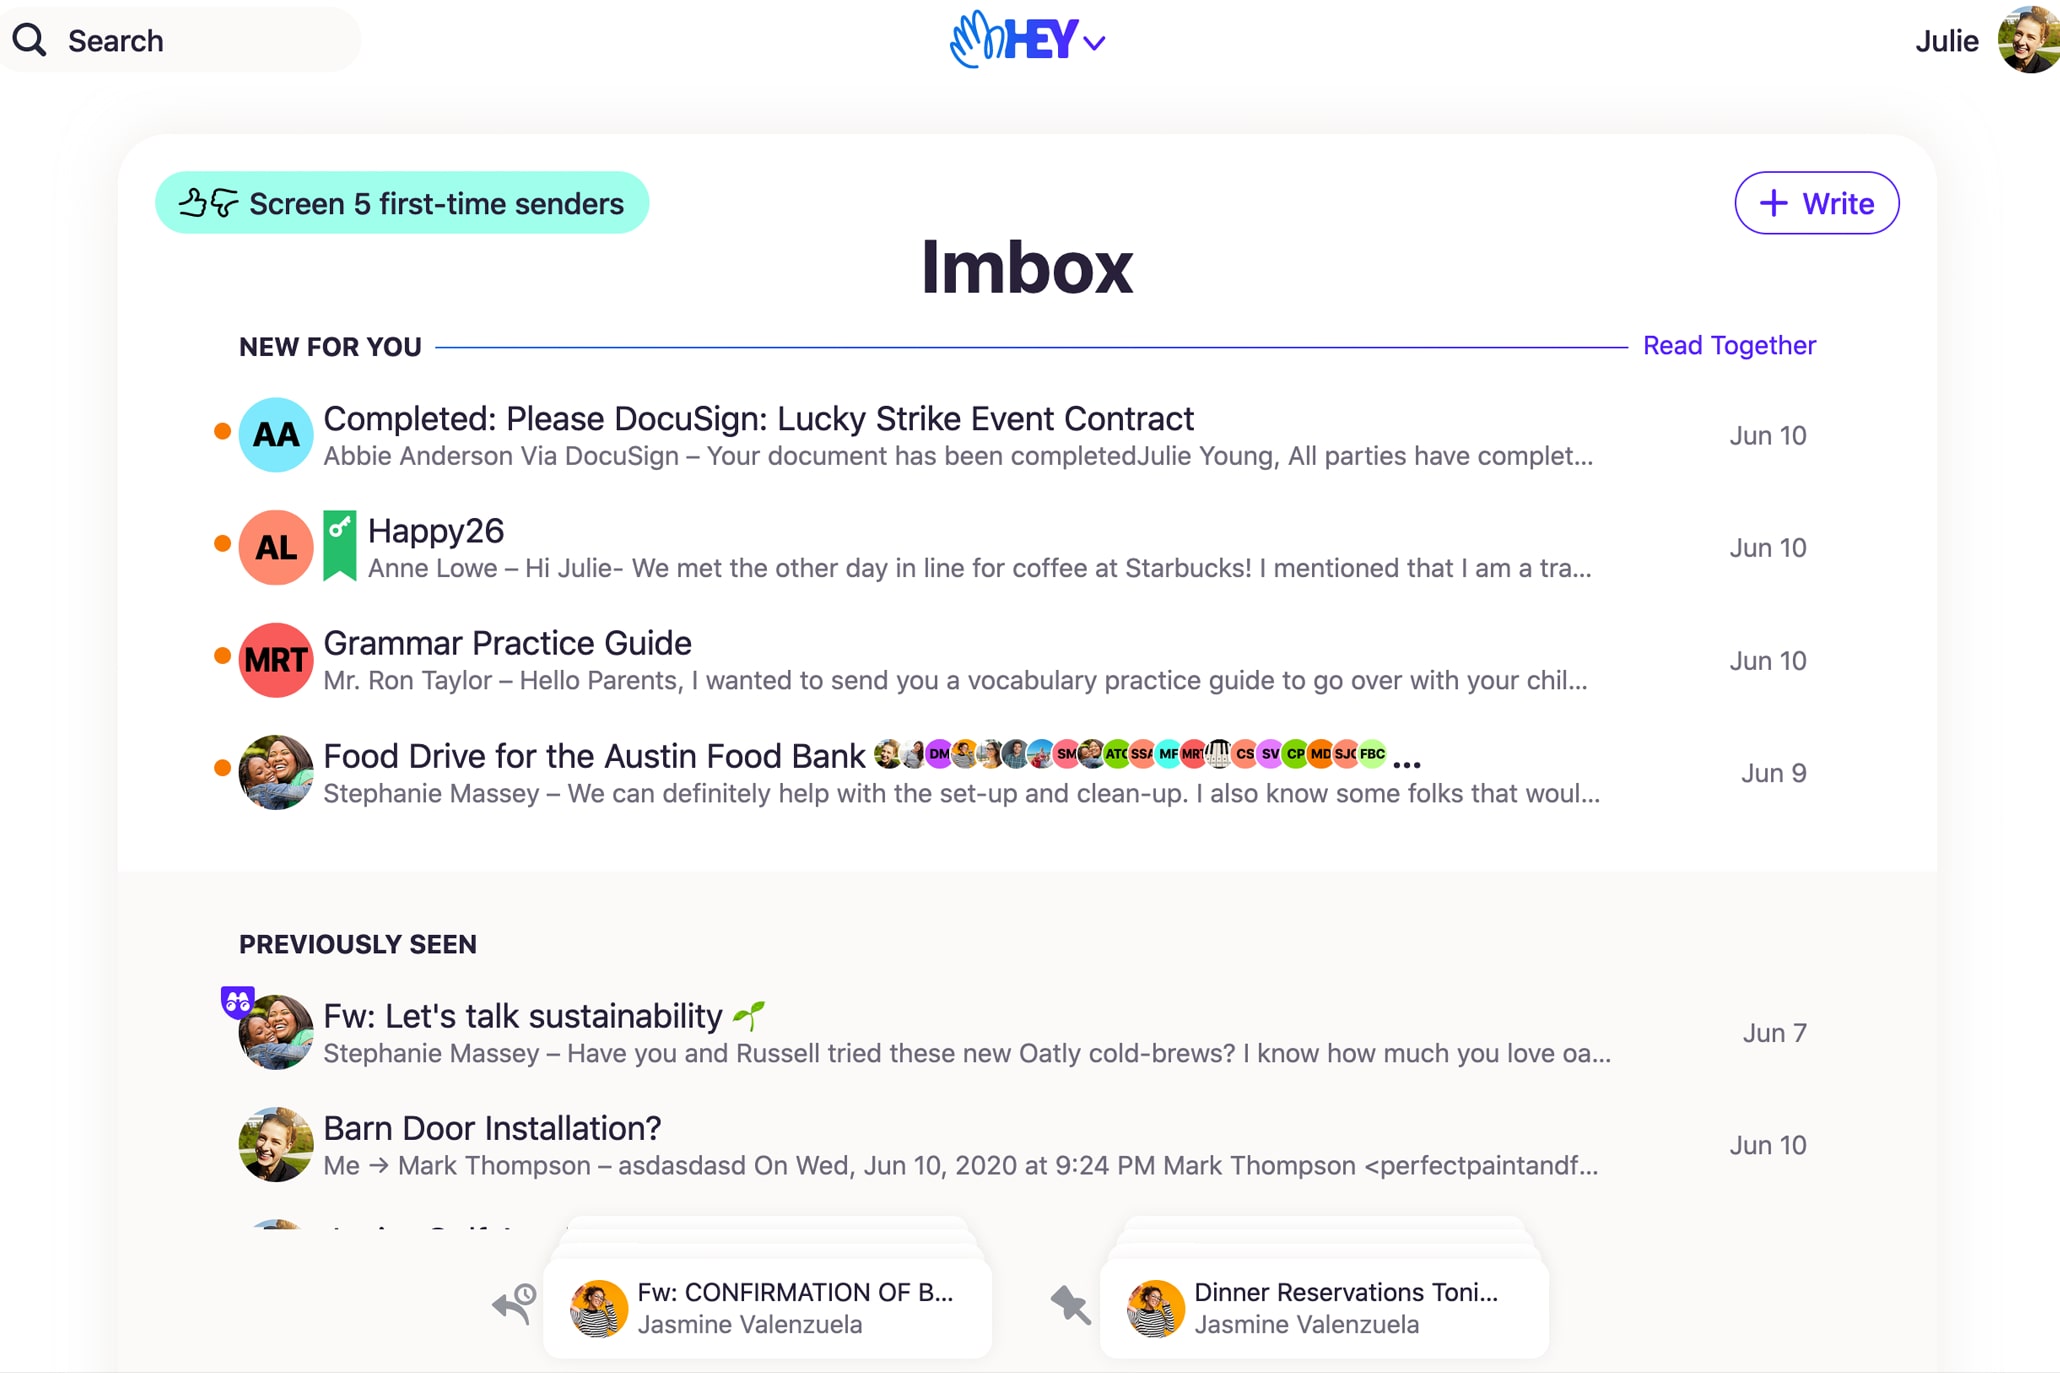 The Imbox section of the Hey email app, showing various email messages.